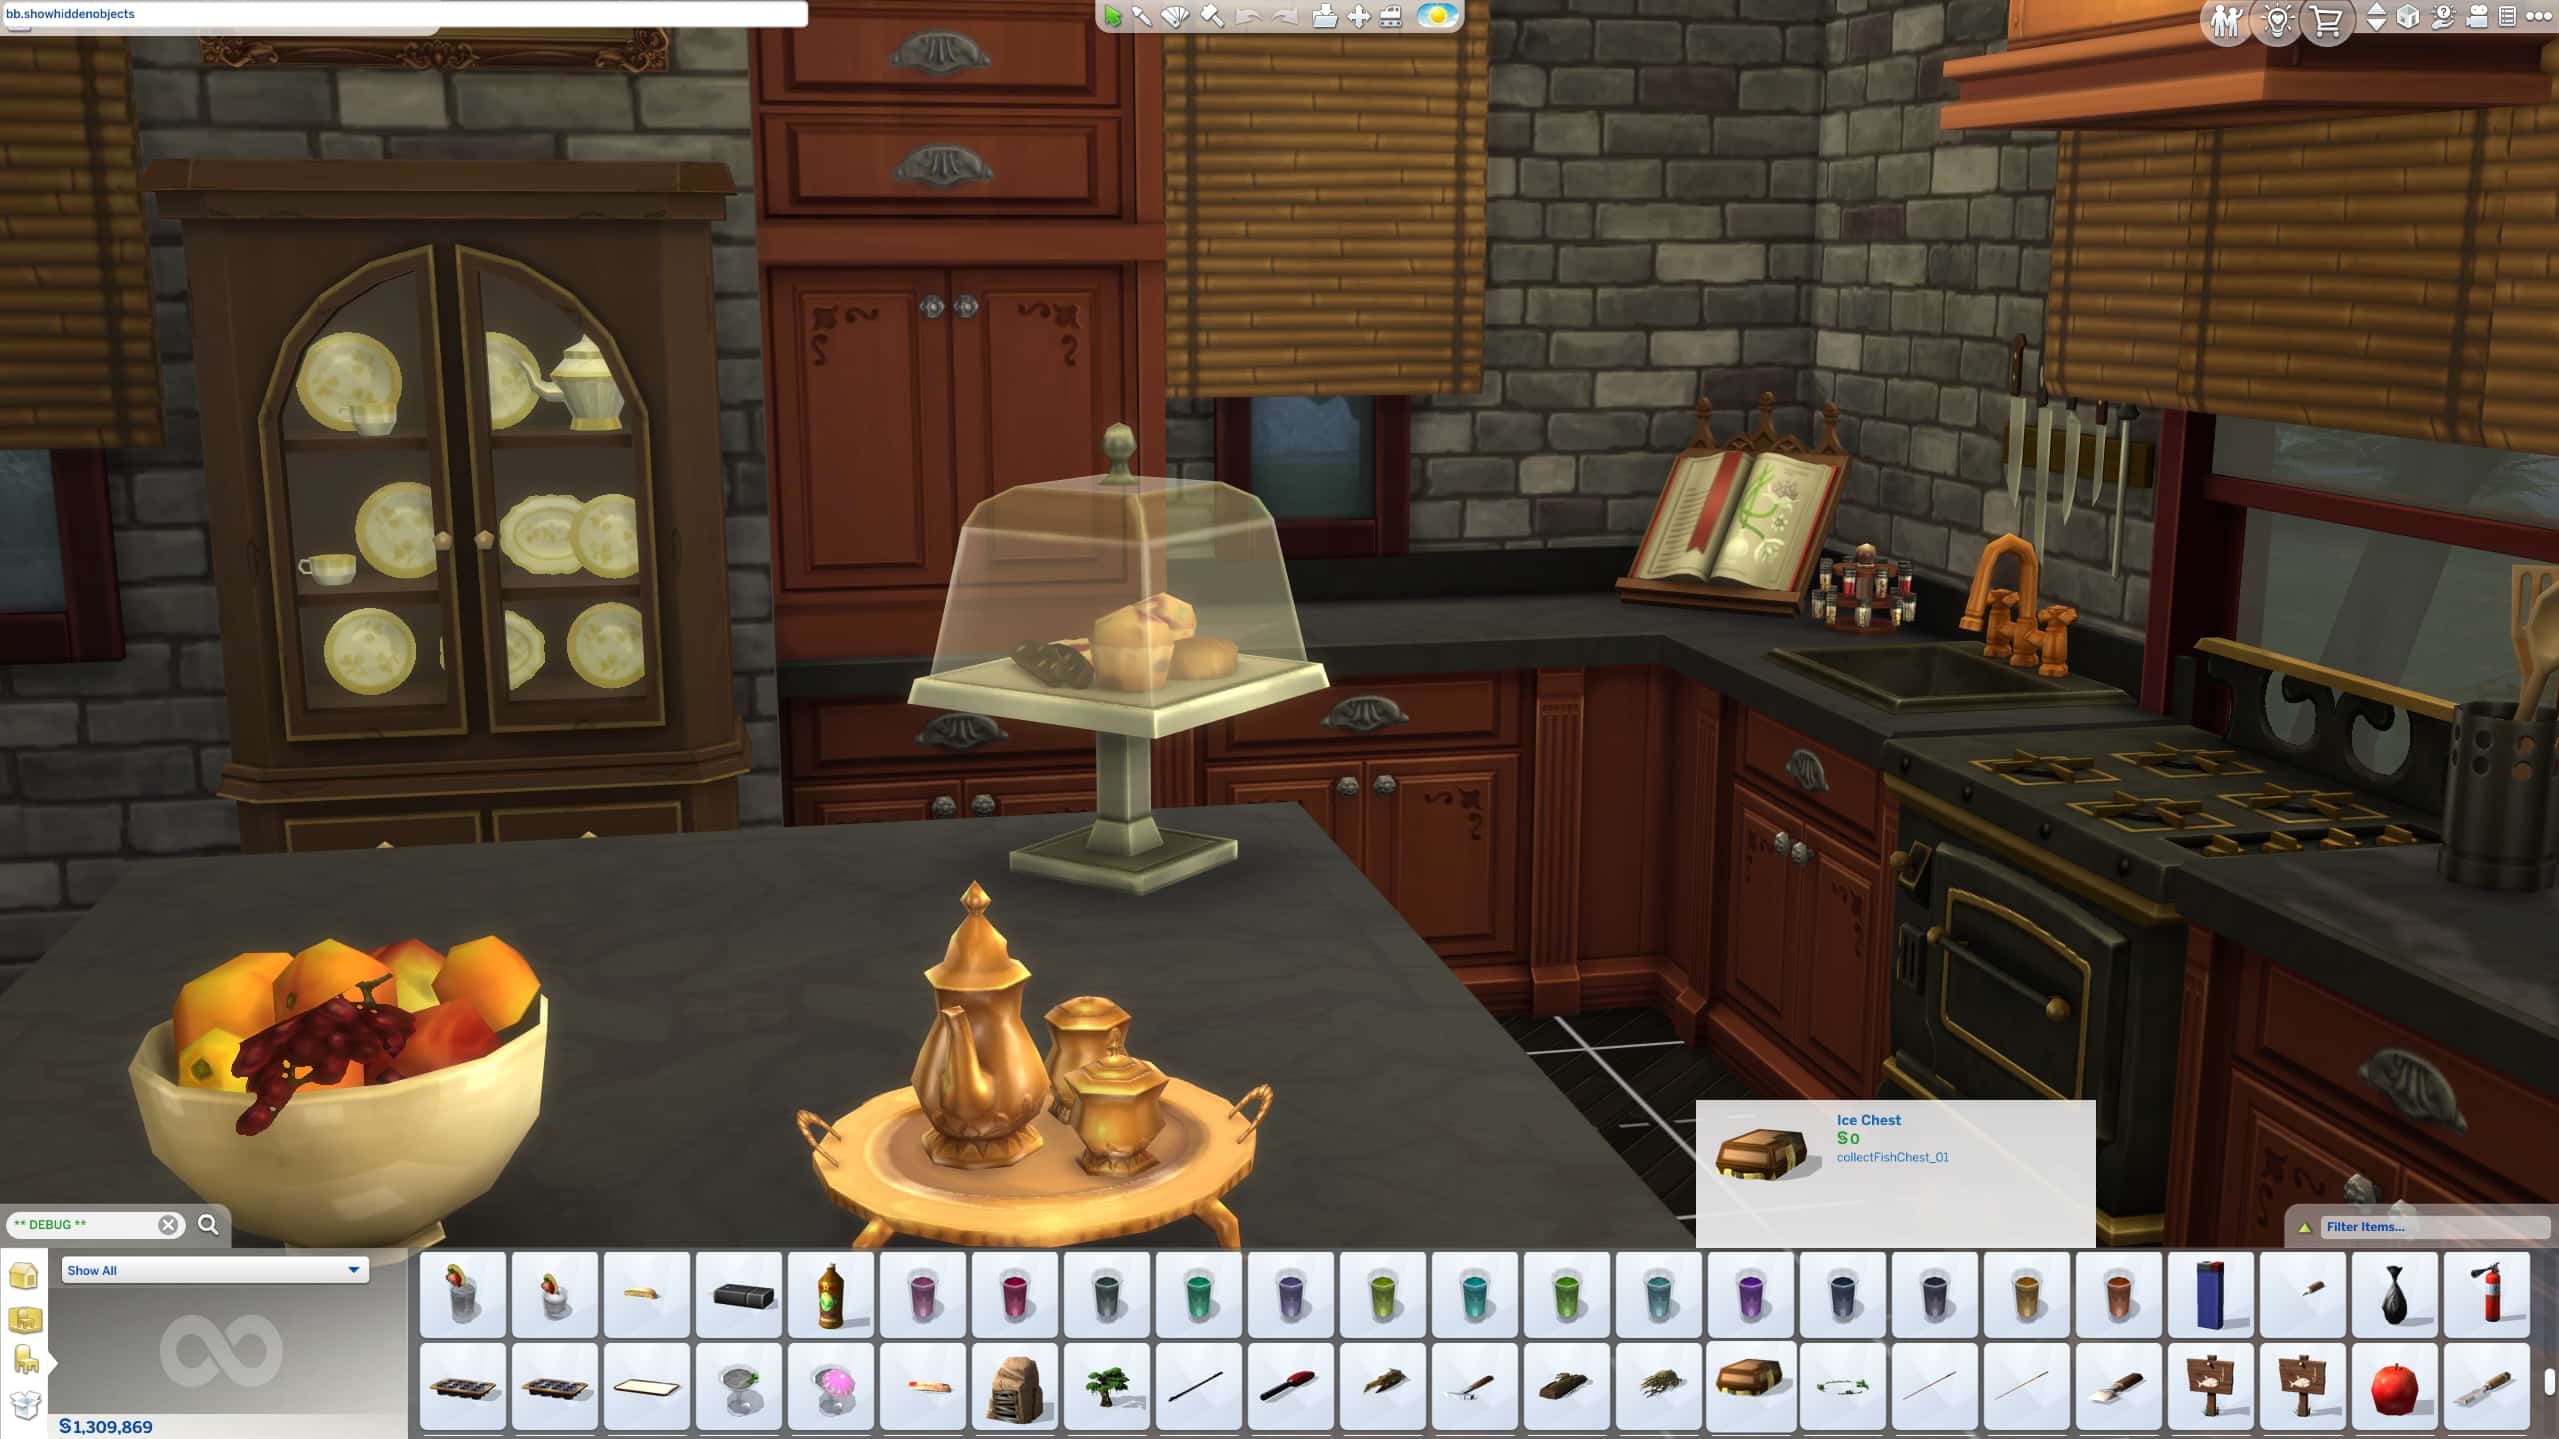 The Sims 4 - how to see Hidden Objects in build mode - cheat tip